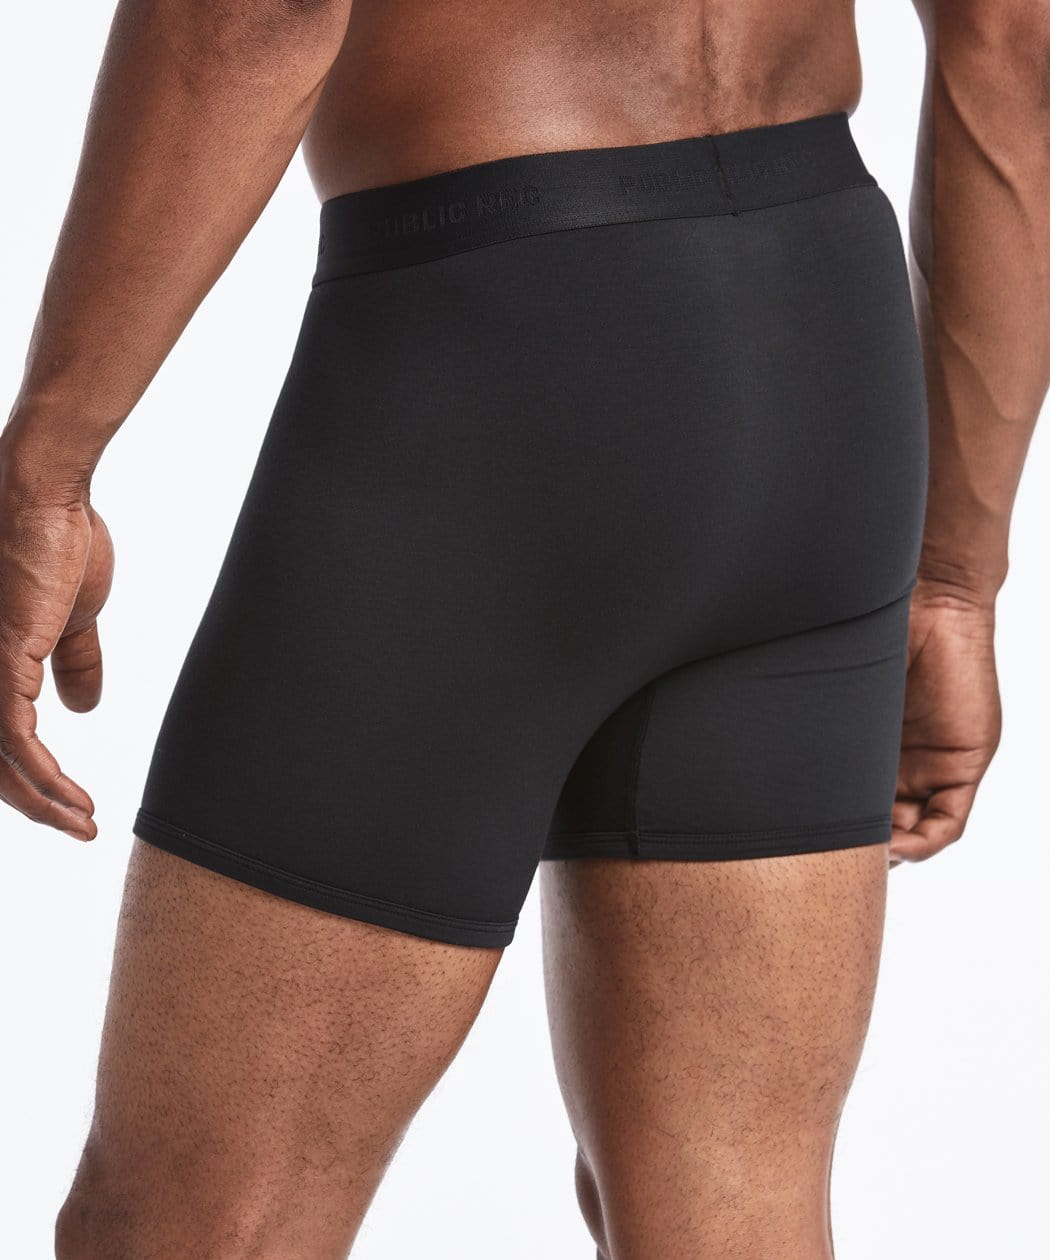 Male Power Barely There Mini Boxer Short Underwear Low Waist High